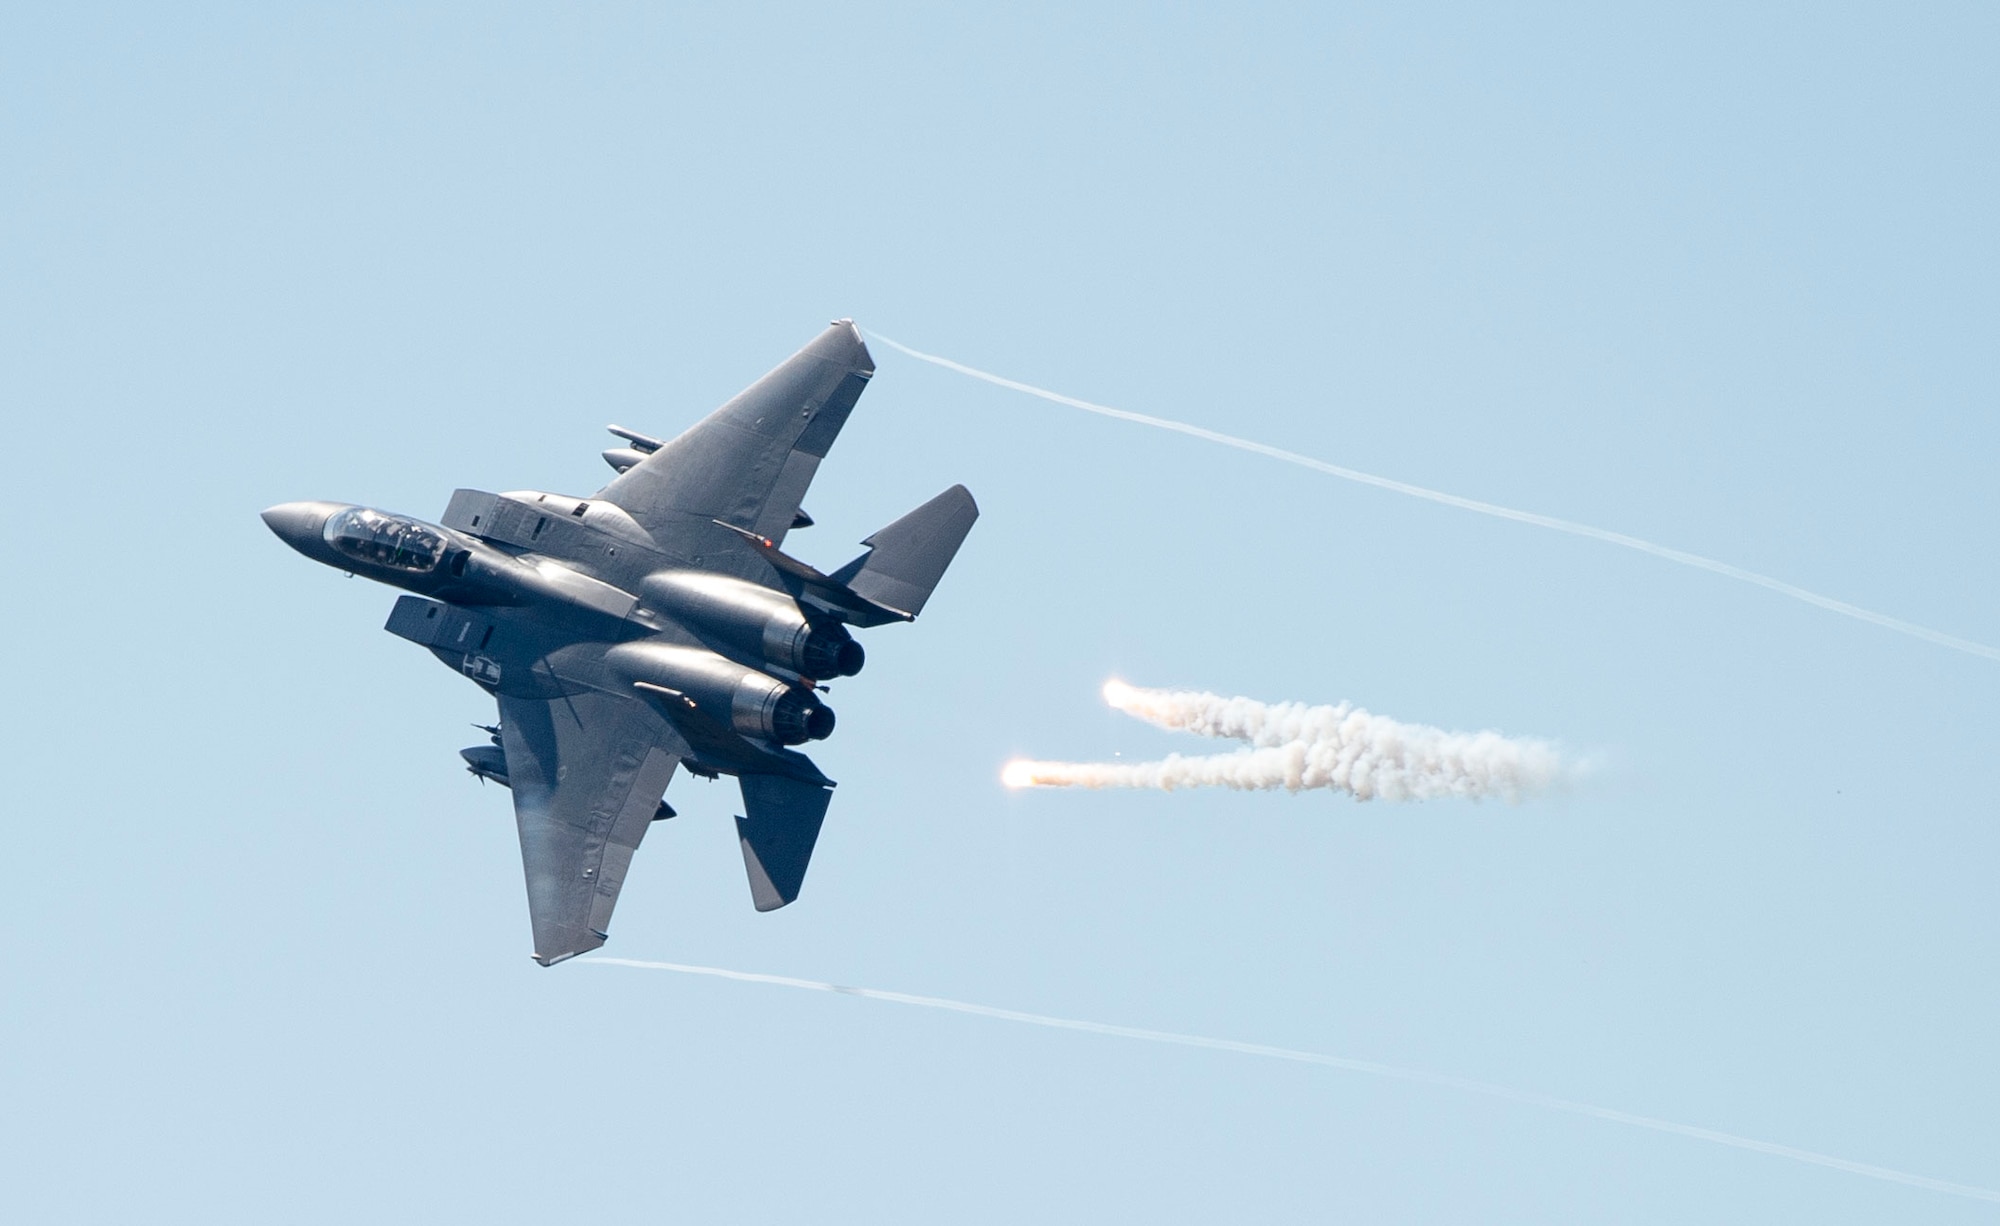 An F-15E Strike Eagle releases flares over Grand Bay Bombing and Gunnery Range at Moody Air Force Base, Ga., Feb. 18, 2016. Multiple U.S. Air Force aircraft within Air Combat Command conducted joint combat rescue and aerial training that showcased the aircrafts tactical air and ground maneuvers, as well as its weapons capabilities. (U.S. Air Force photo by Staff Sgt. Brian J. Valencia/Released)